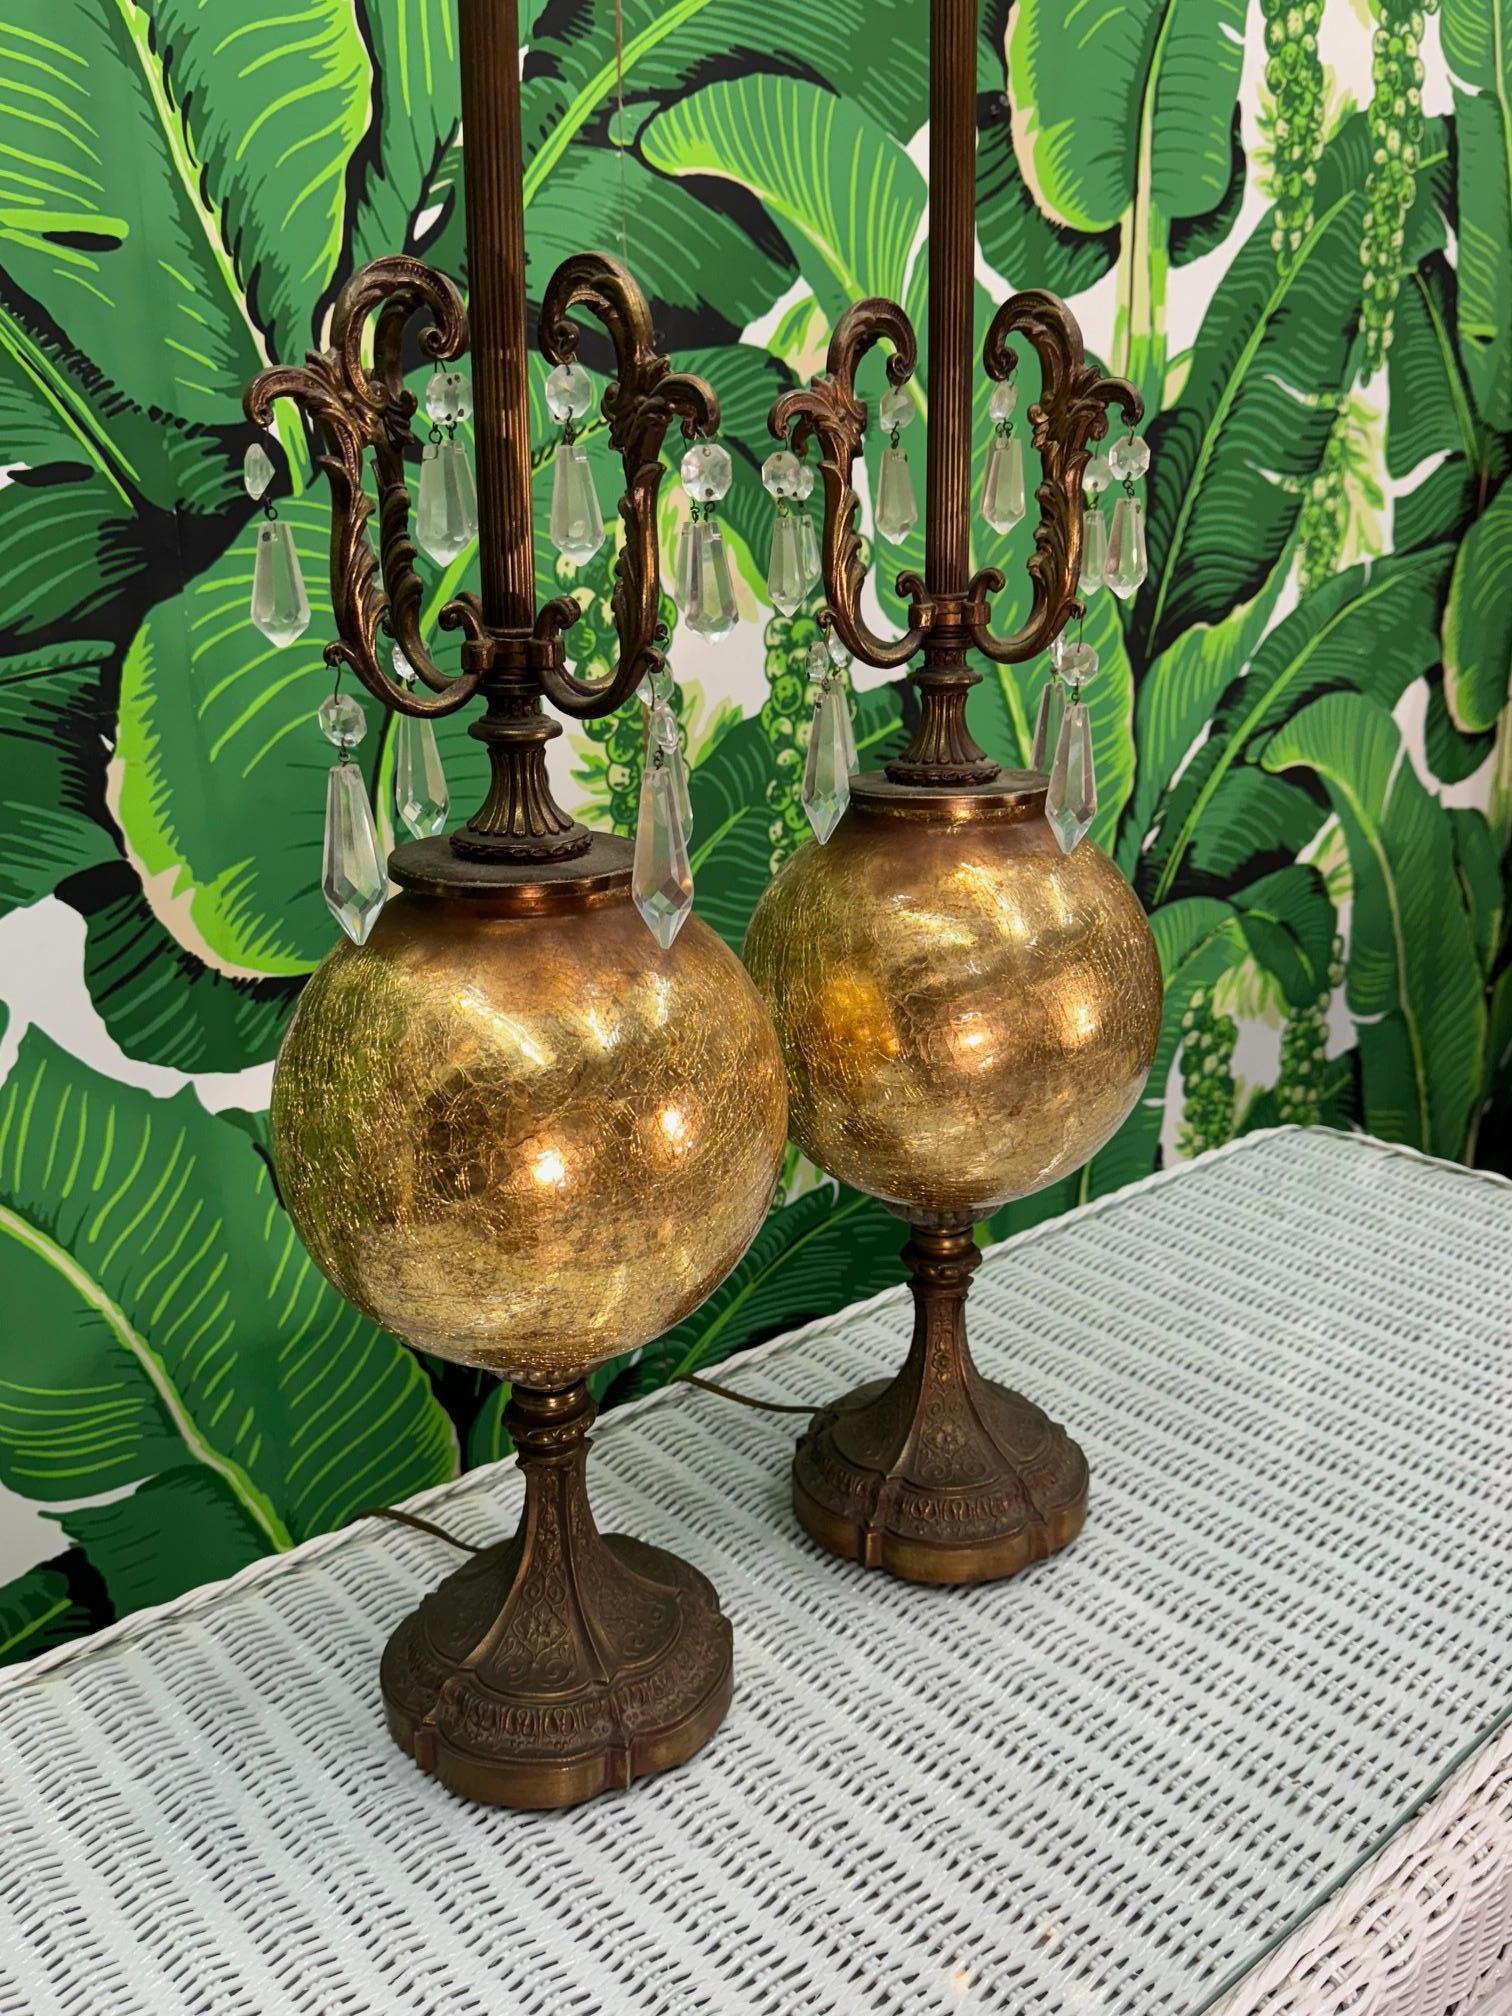 Vintage bronze table lamps feature ornate detailing along with gold mercury glass spheres and hanging crystals. Good vintage condition with minor imperfections consistent with age, see photos for condition details.
For a shipping quote to your exact